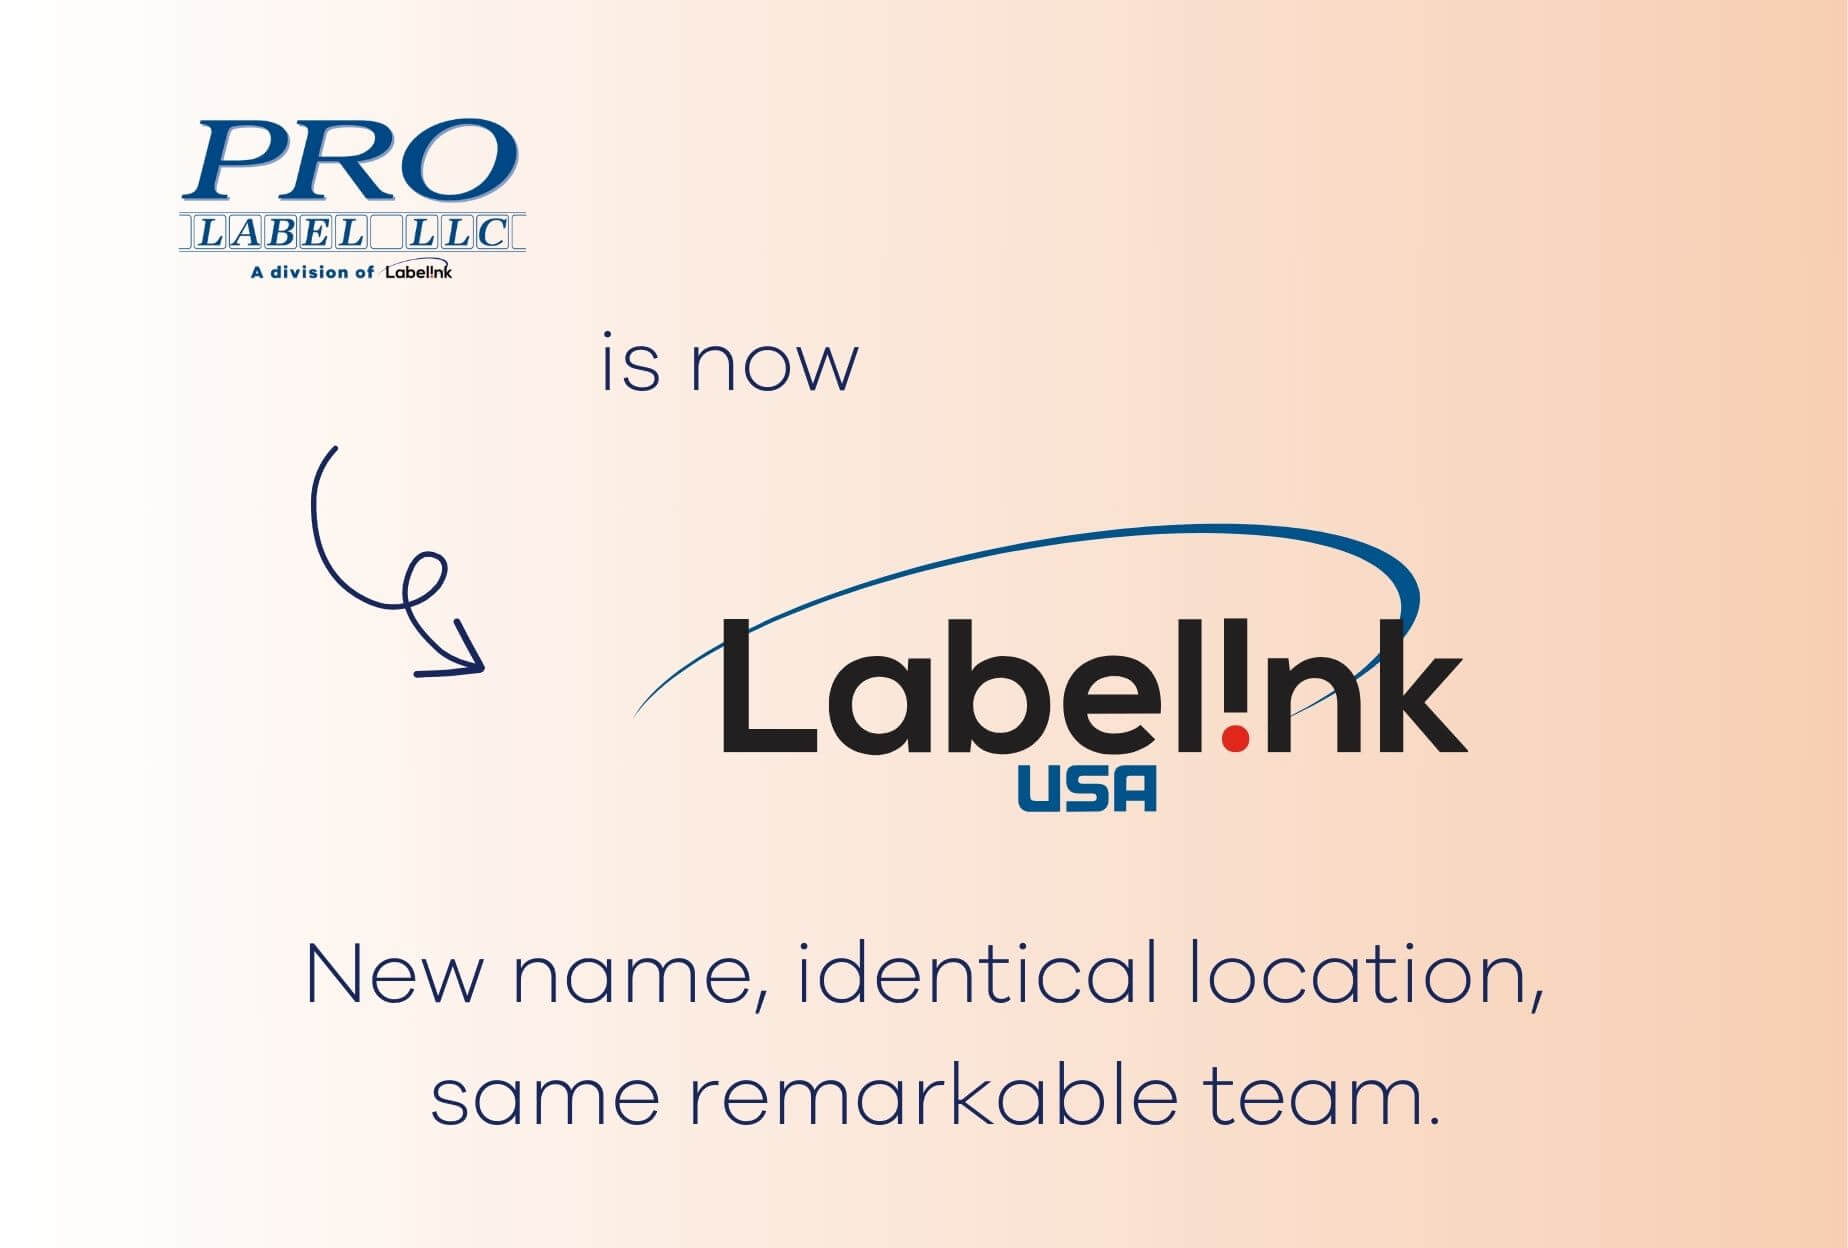 ProLabelLLC is now Labelink USA